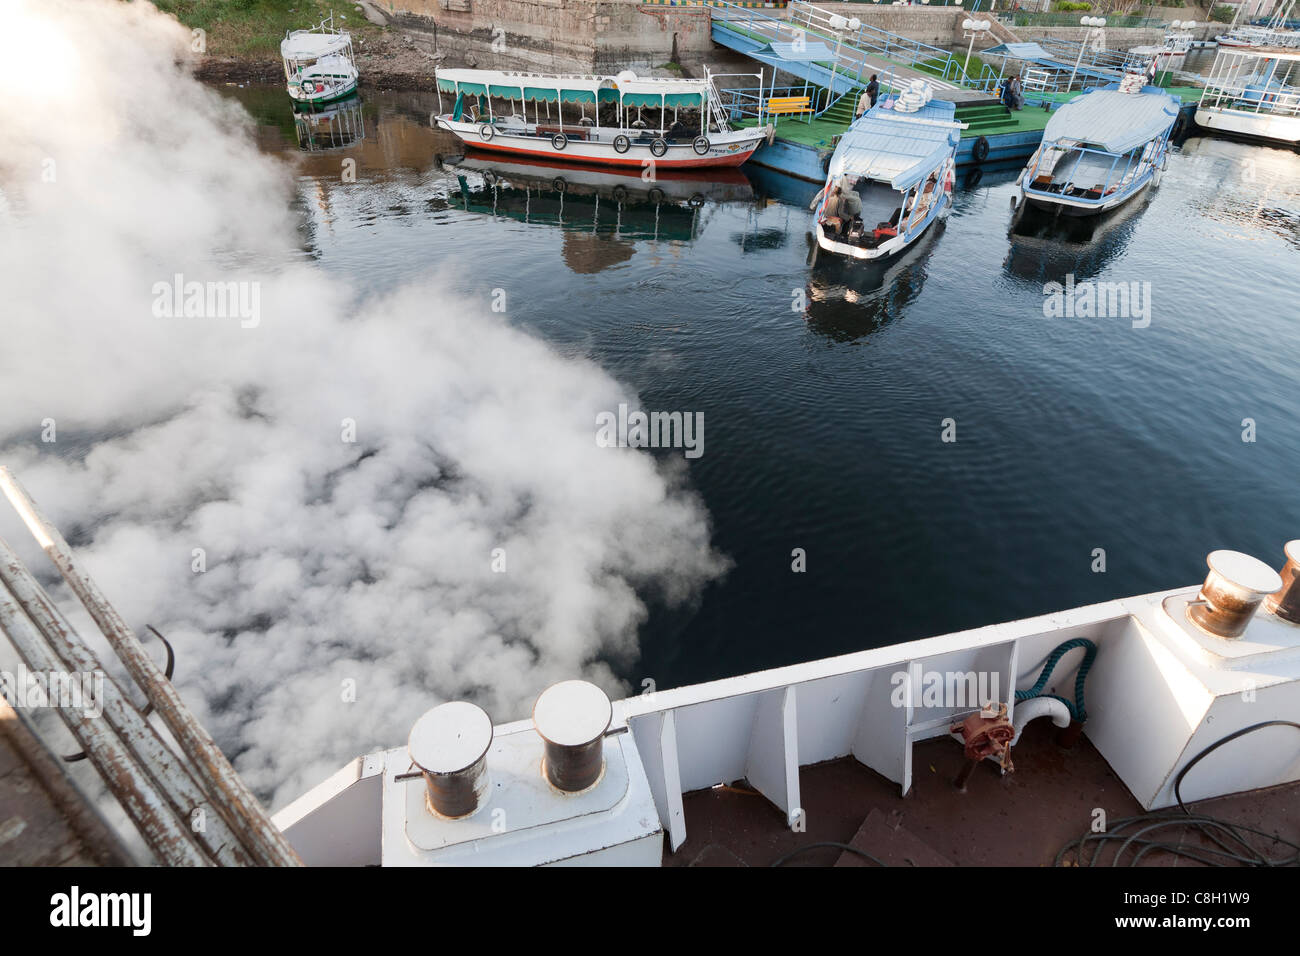 Looking down on the deck of a ship as it vents steam leaving harbour with water taxis in the distance, river Nile, Egypt Stock Photo